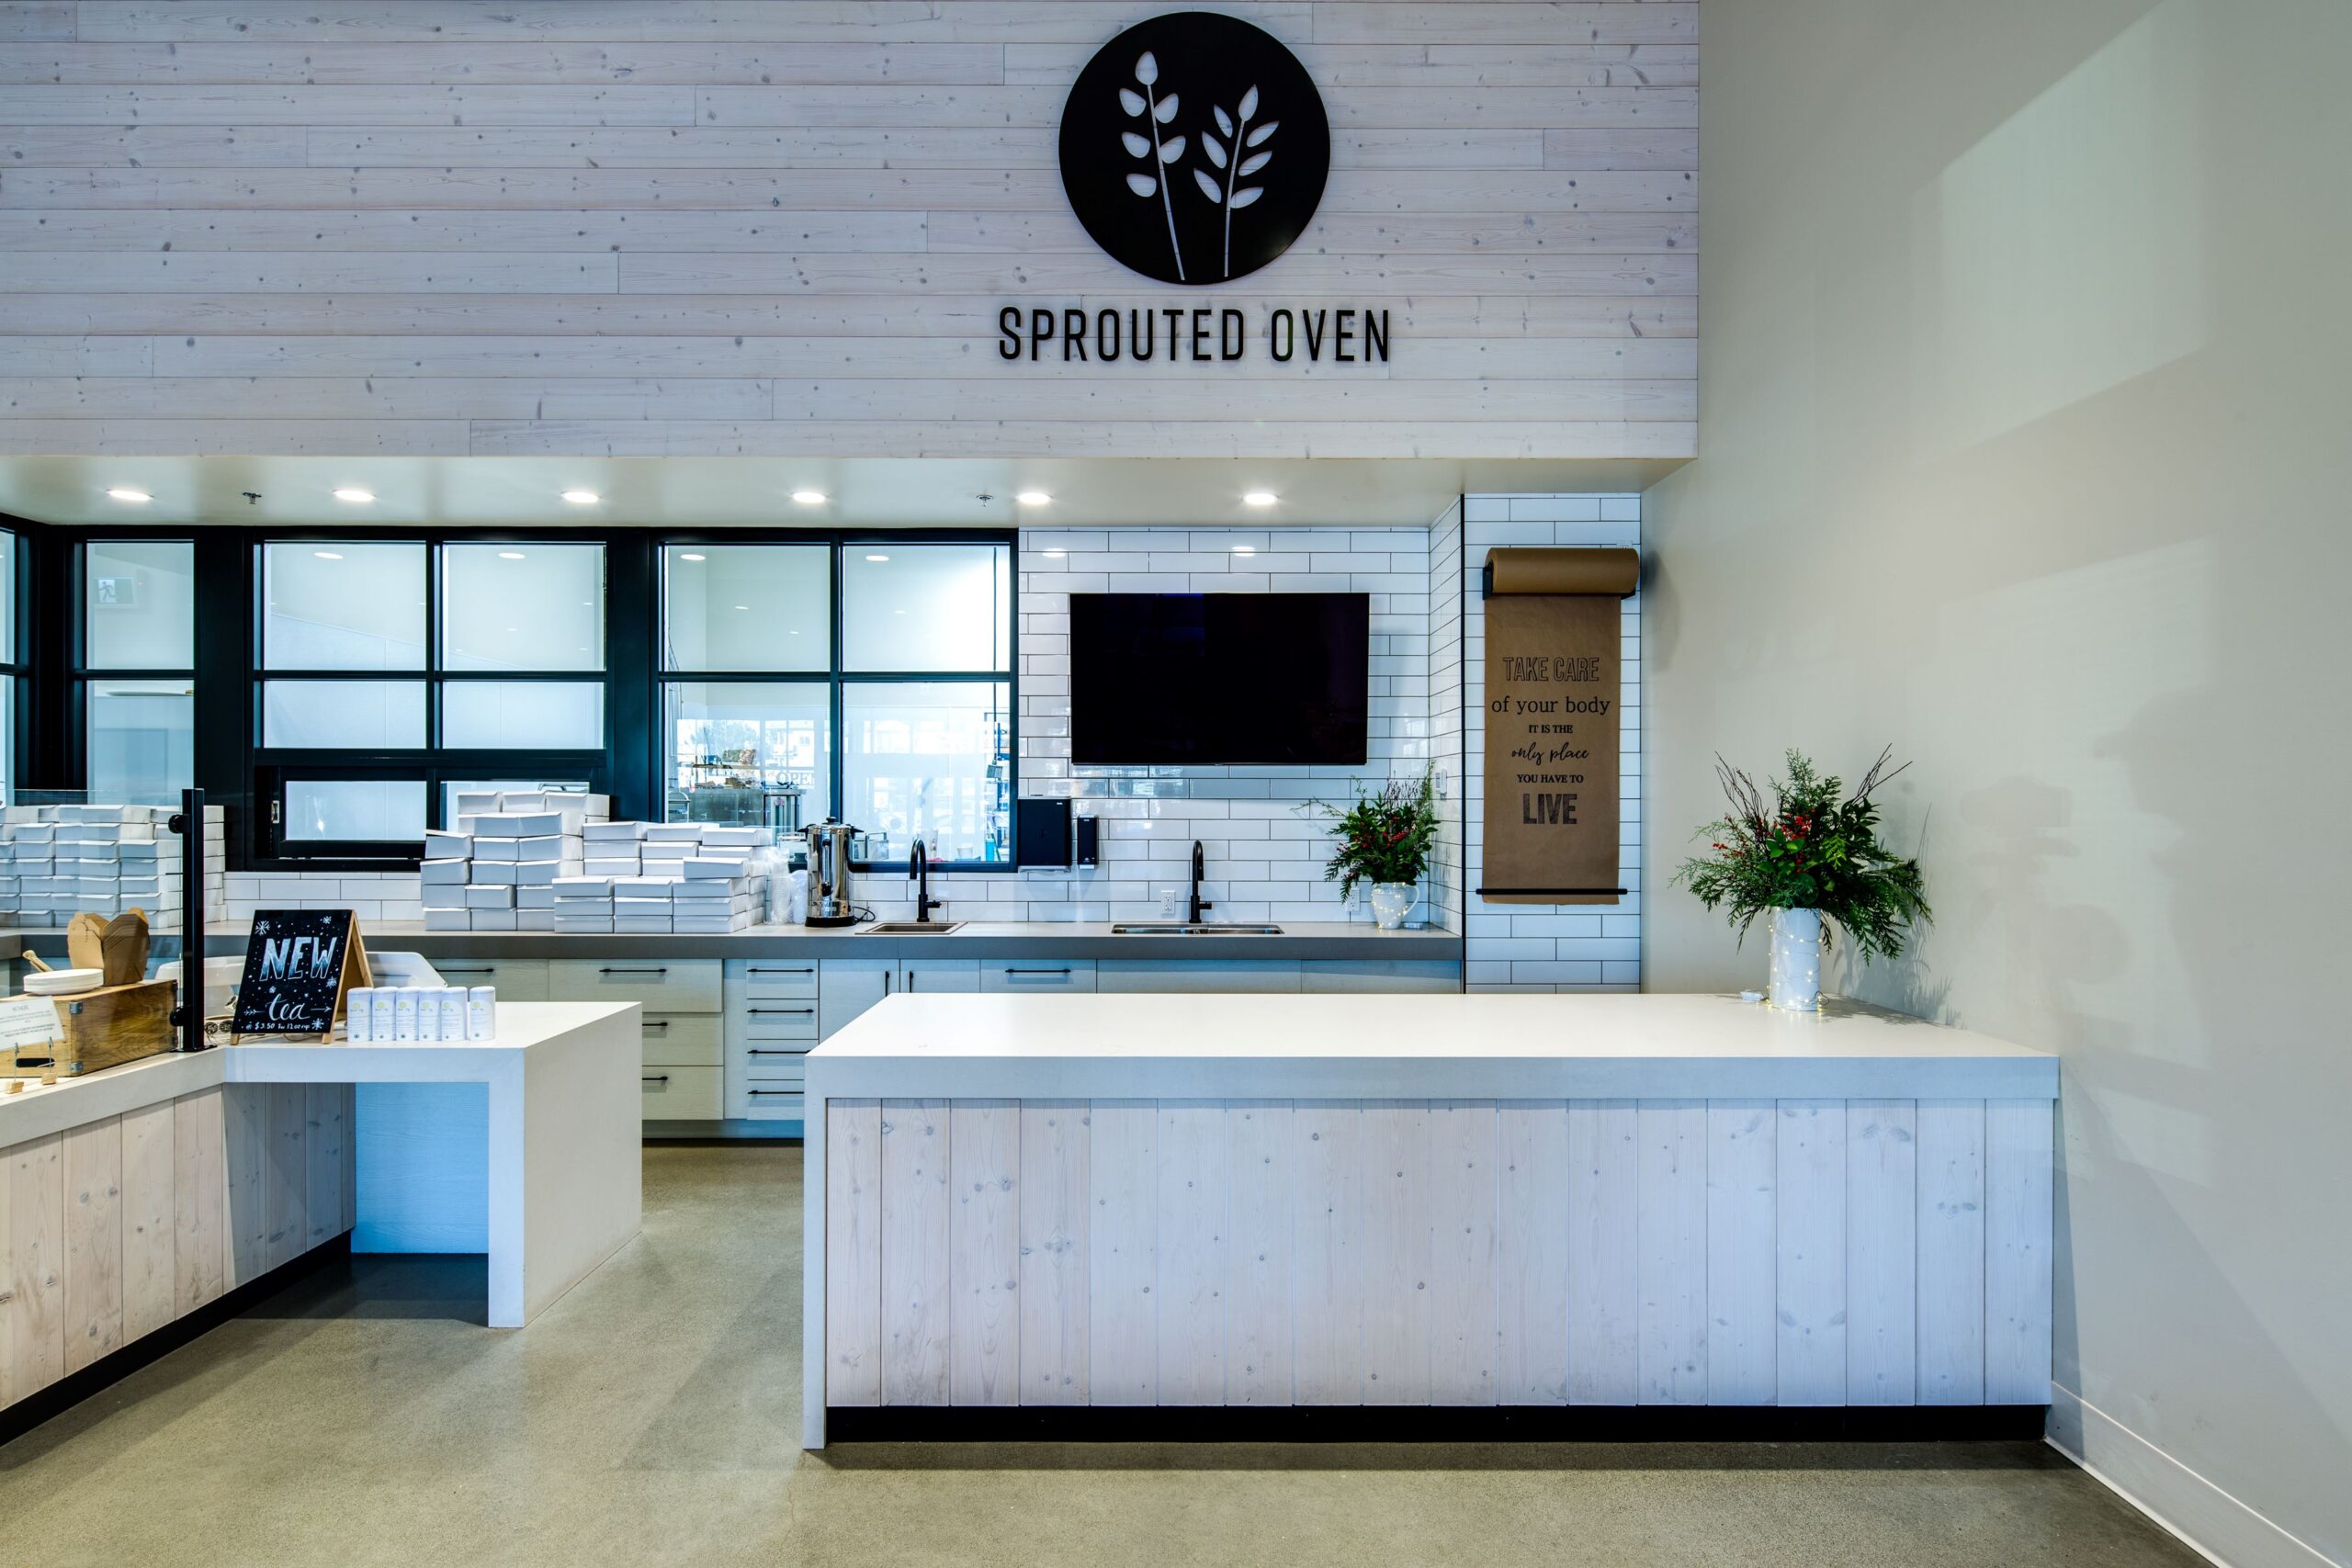 Millwork tables storefront, , Silver Hills – The Sprouted Oven in Abbotsford BC, by Cutler